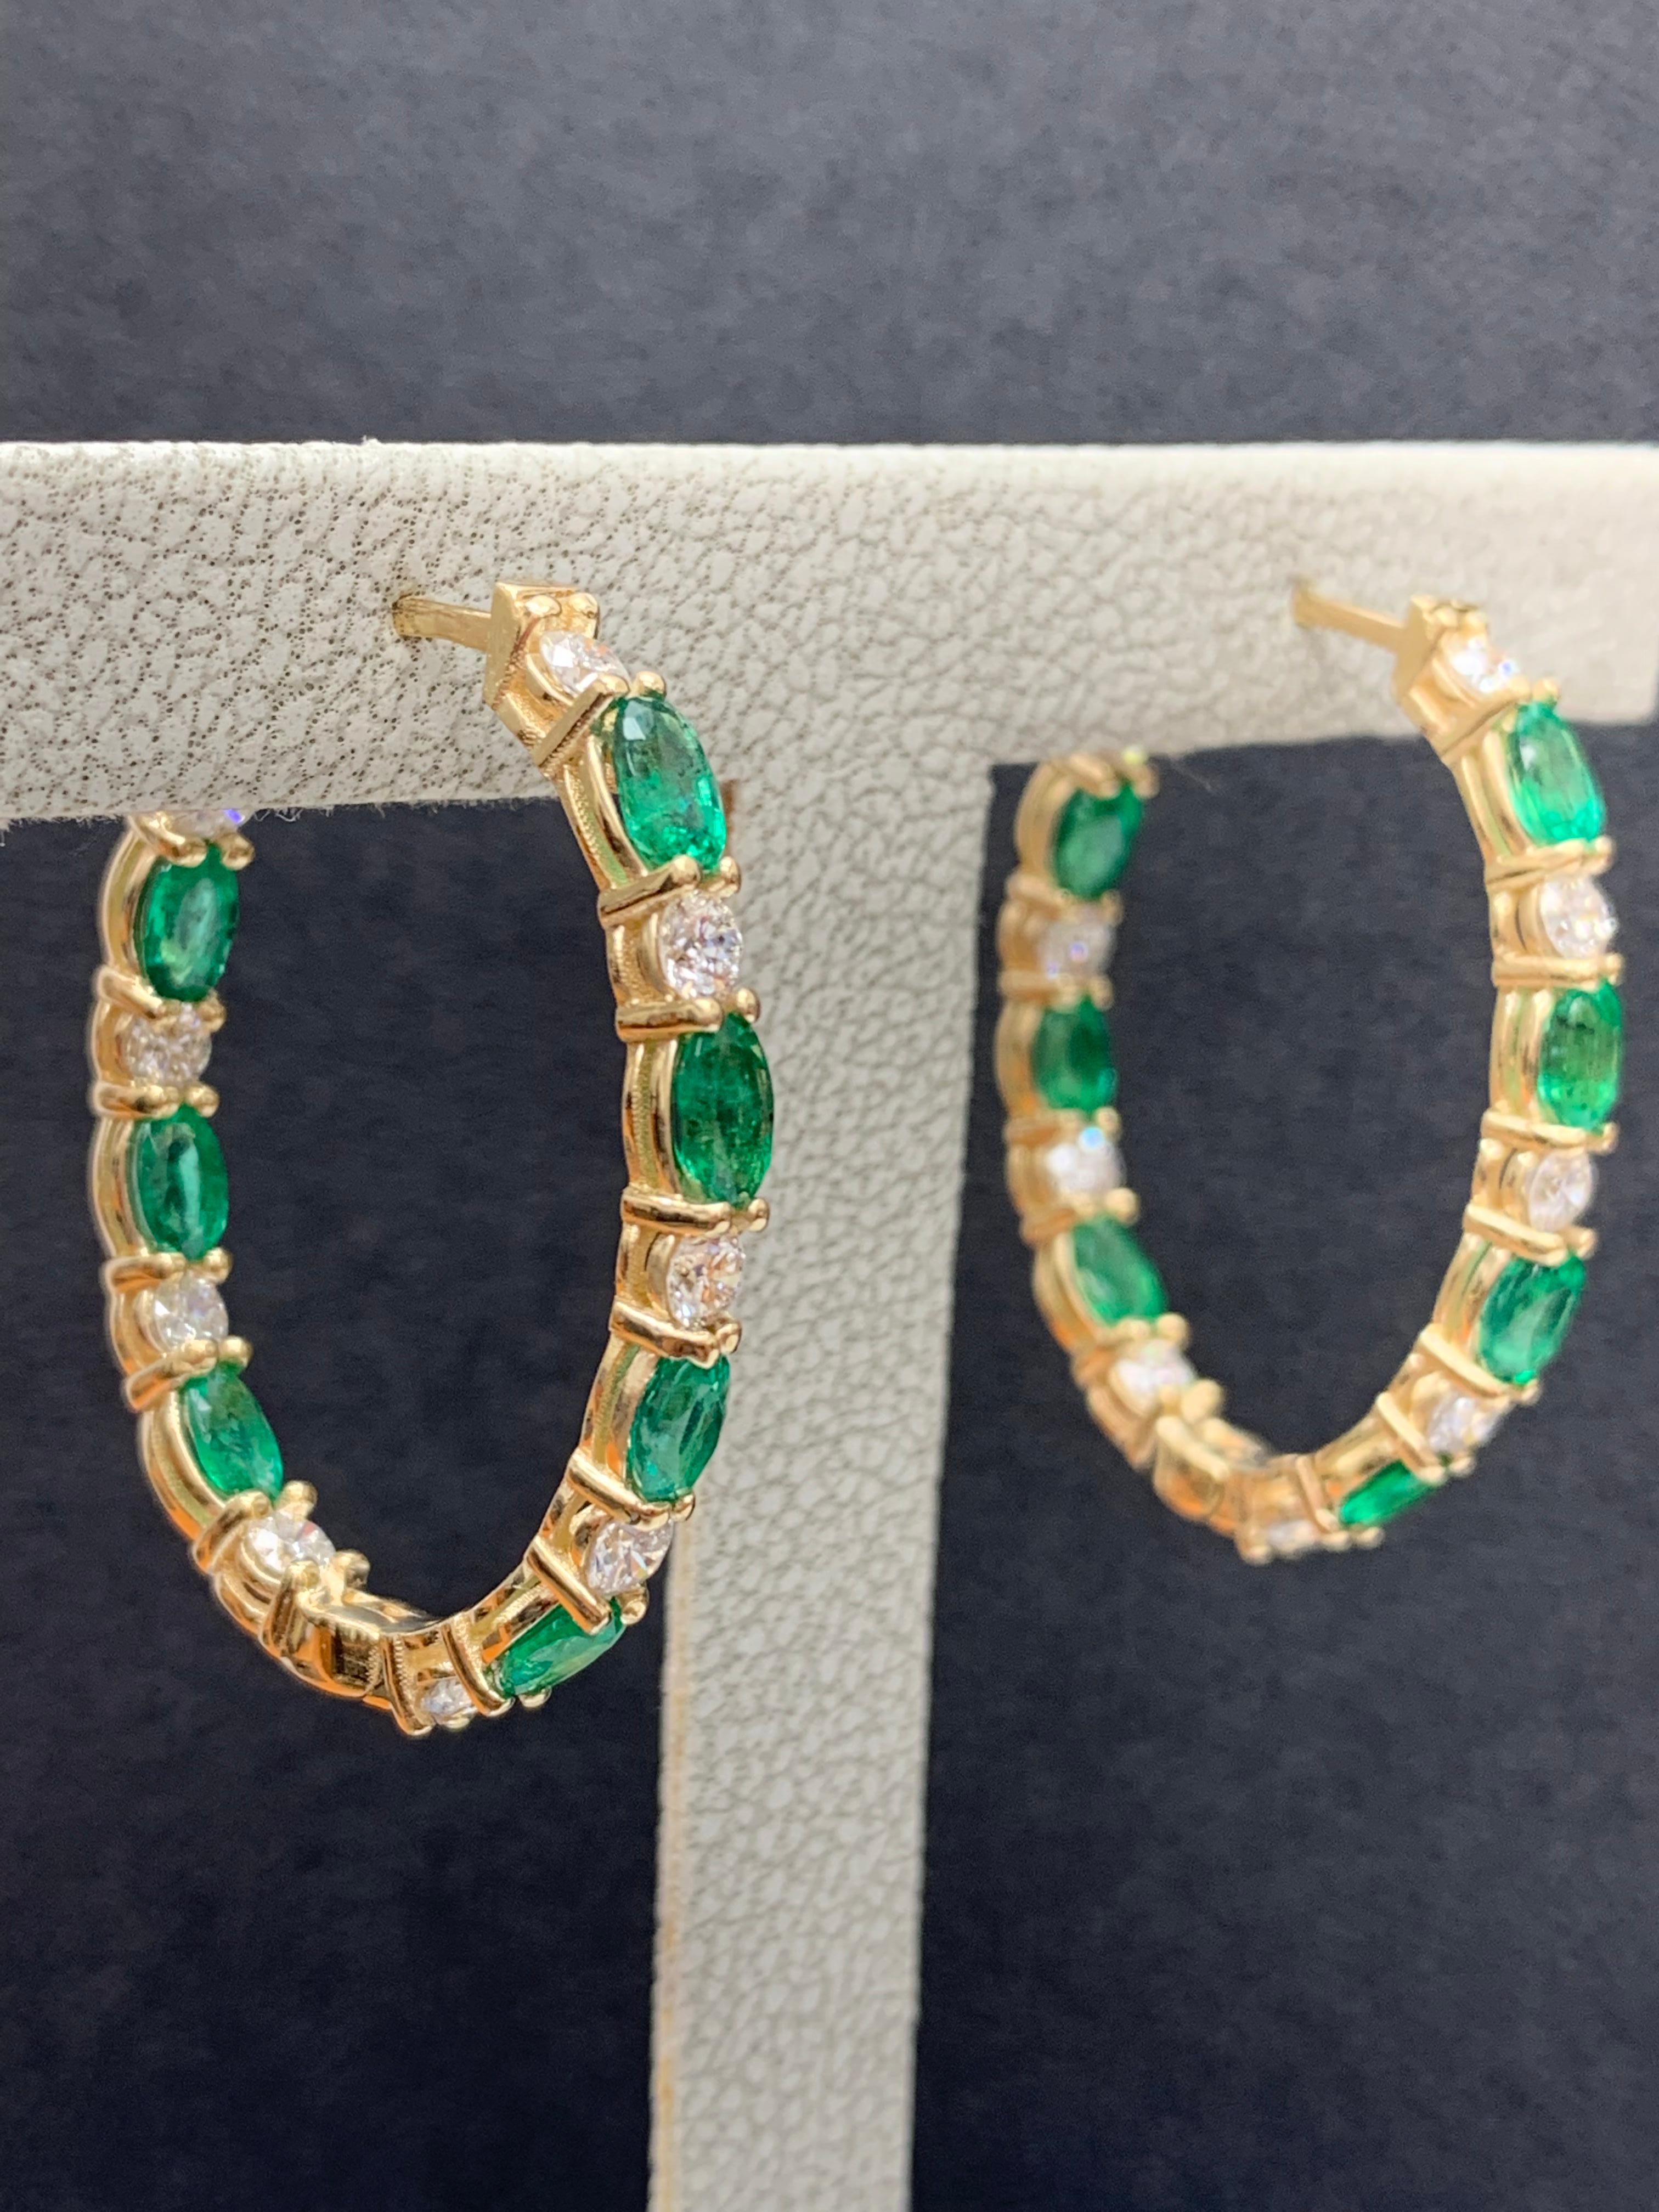 3.13 Carat Oval Cut Emerald and Diamond Hoop Earrings in 14K Yellow Gold For Sale 6